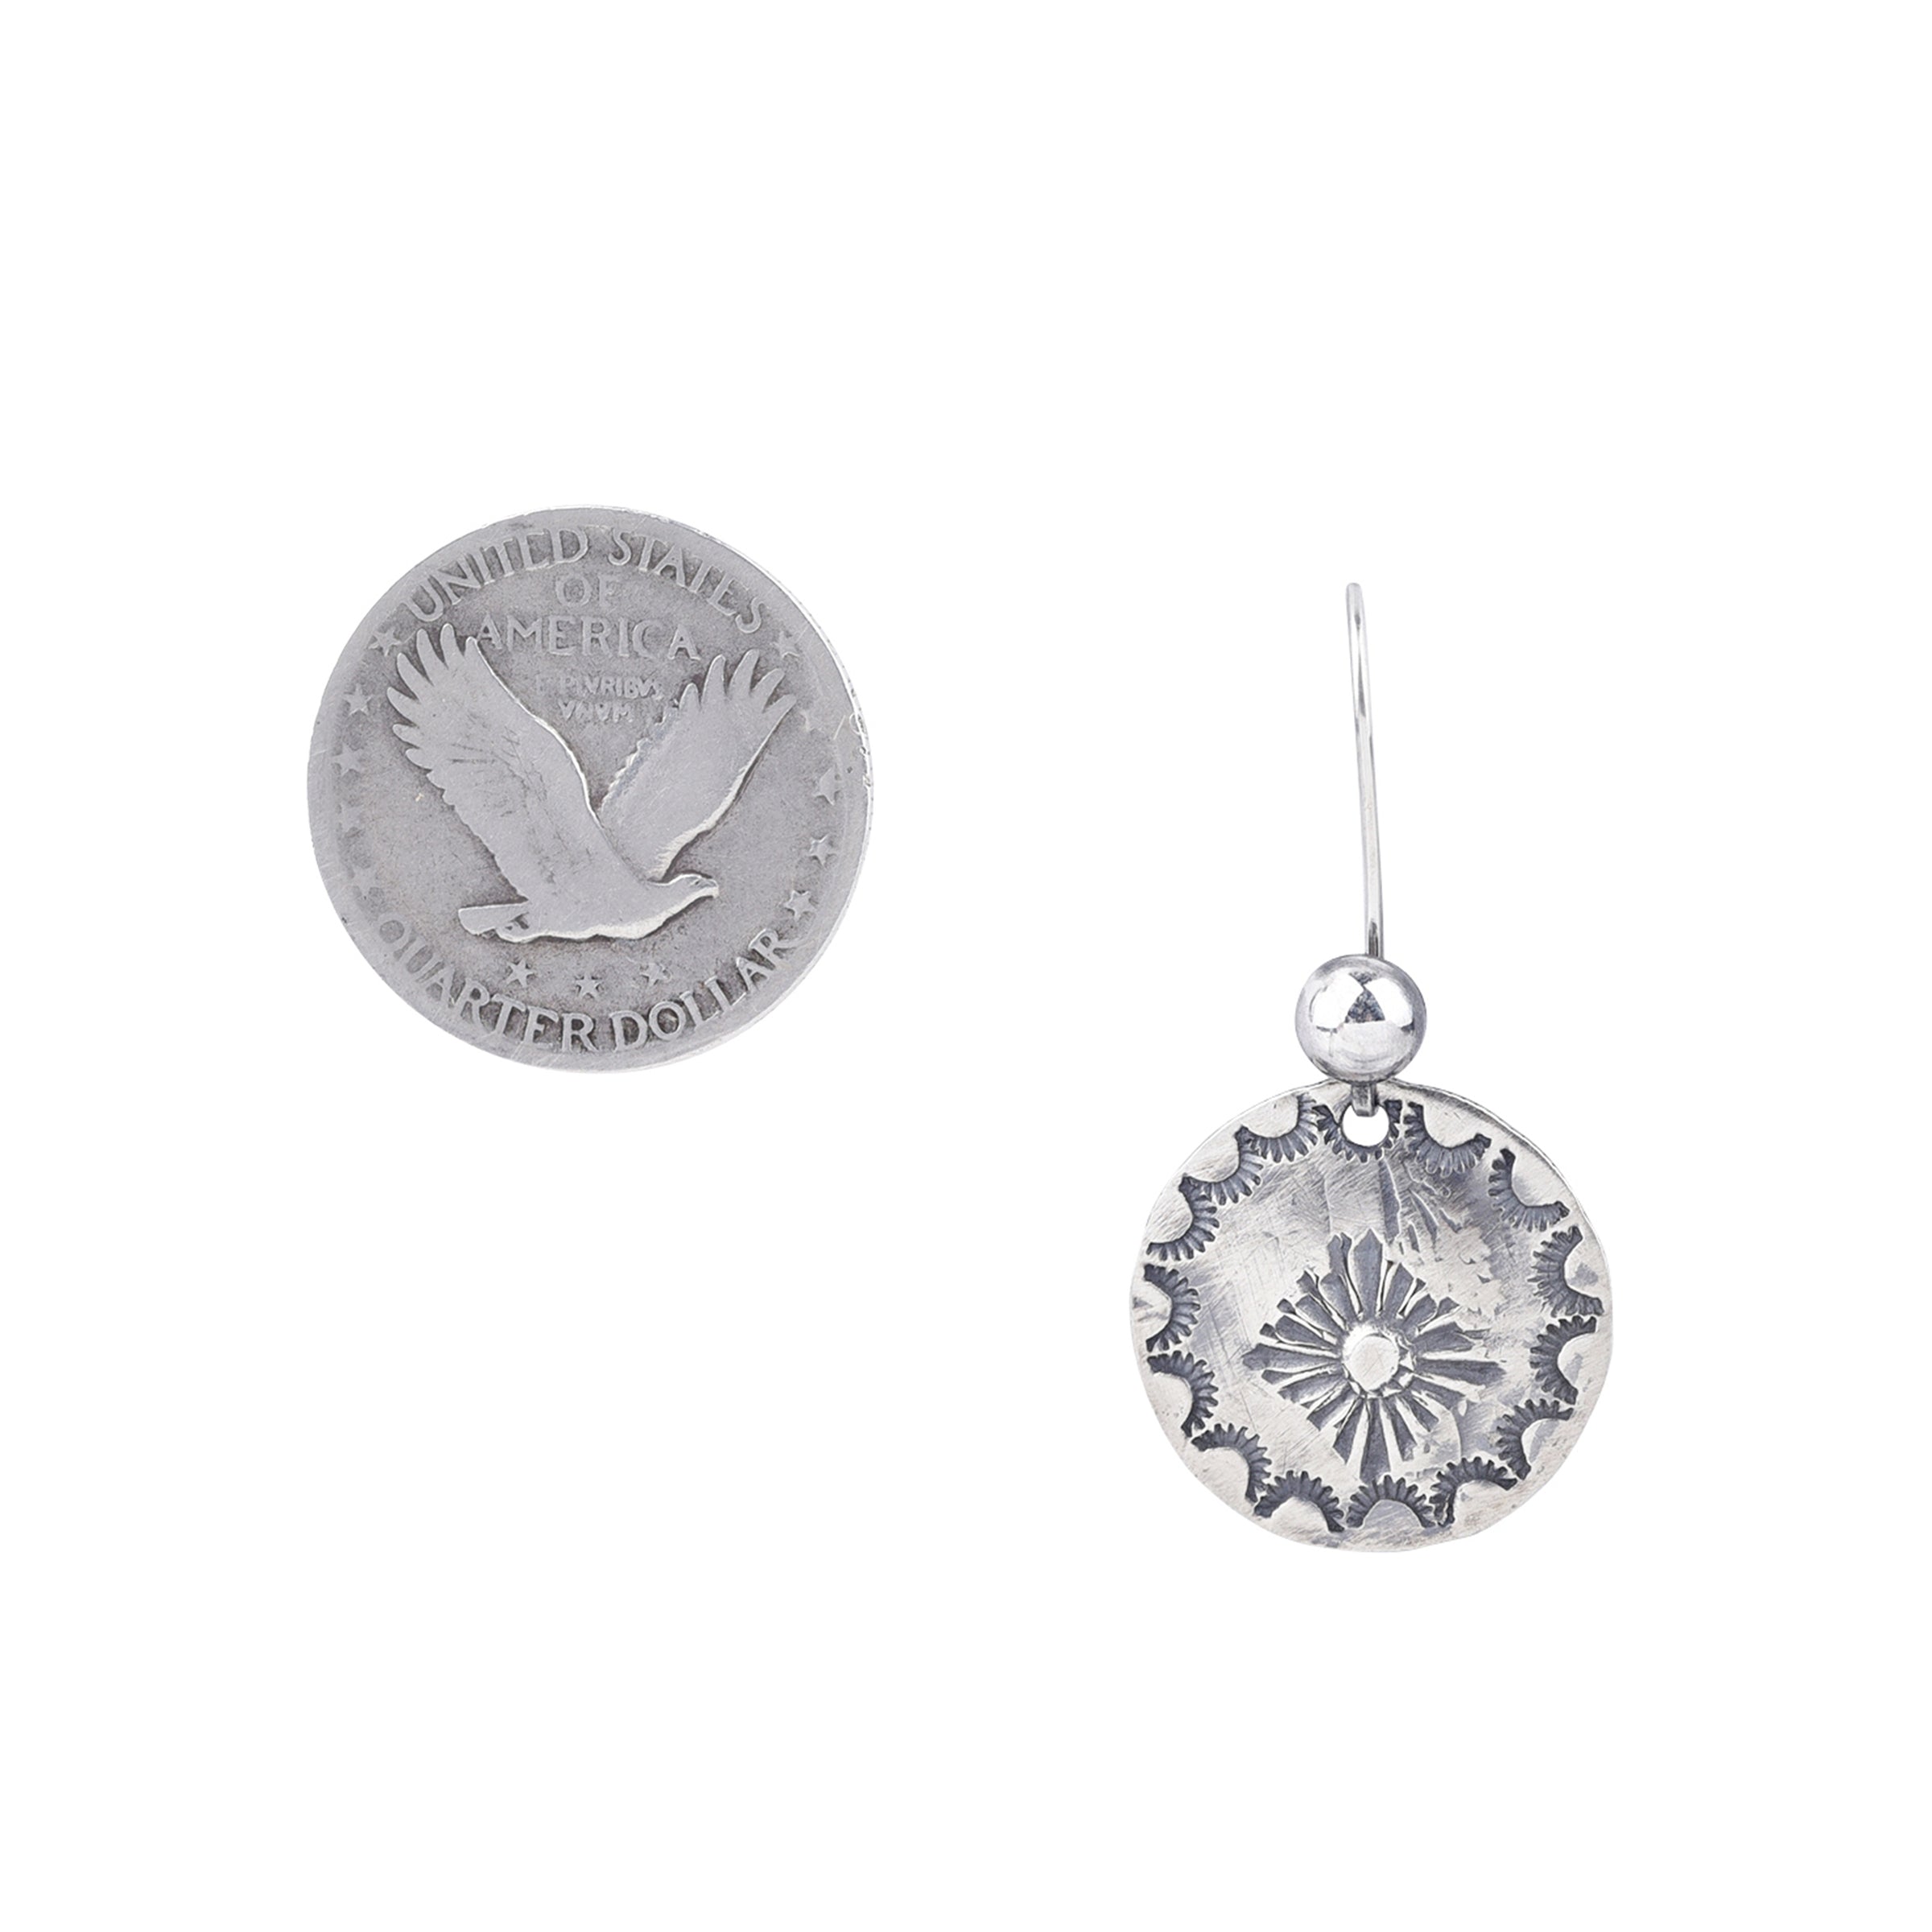 Jesse Robbins Coin Stamp Earrings